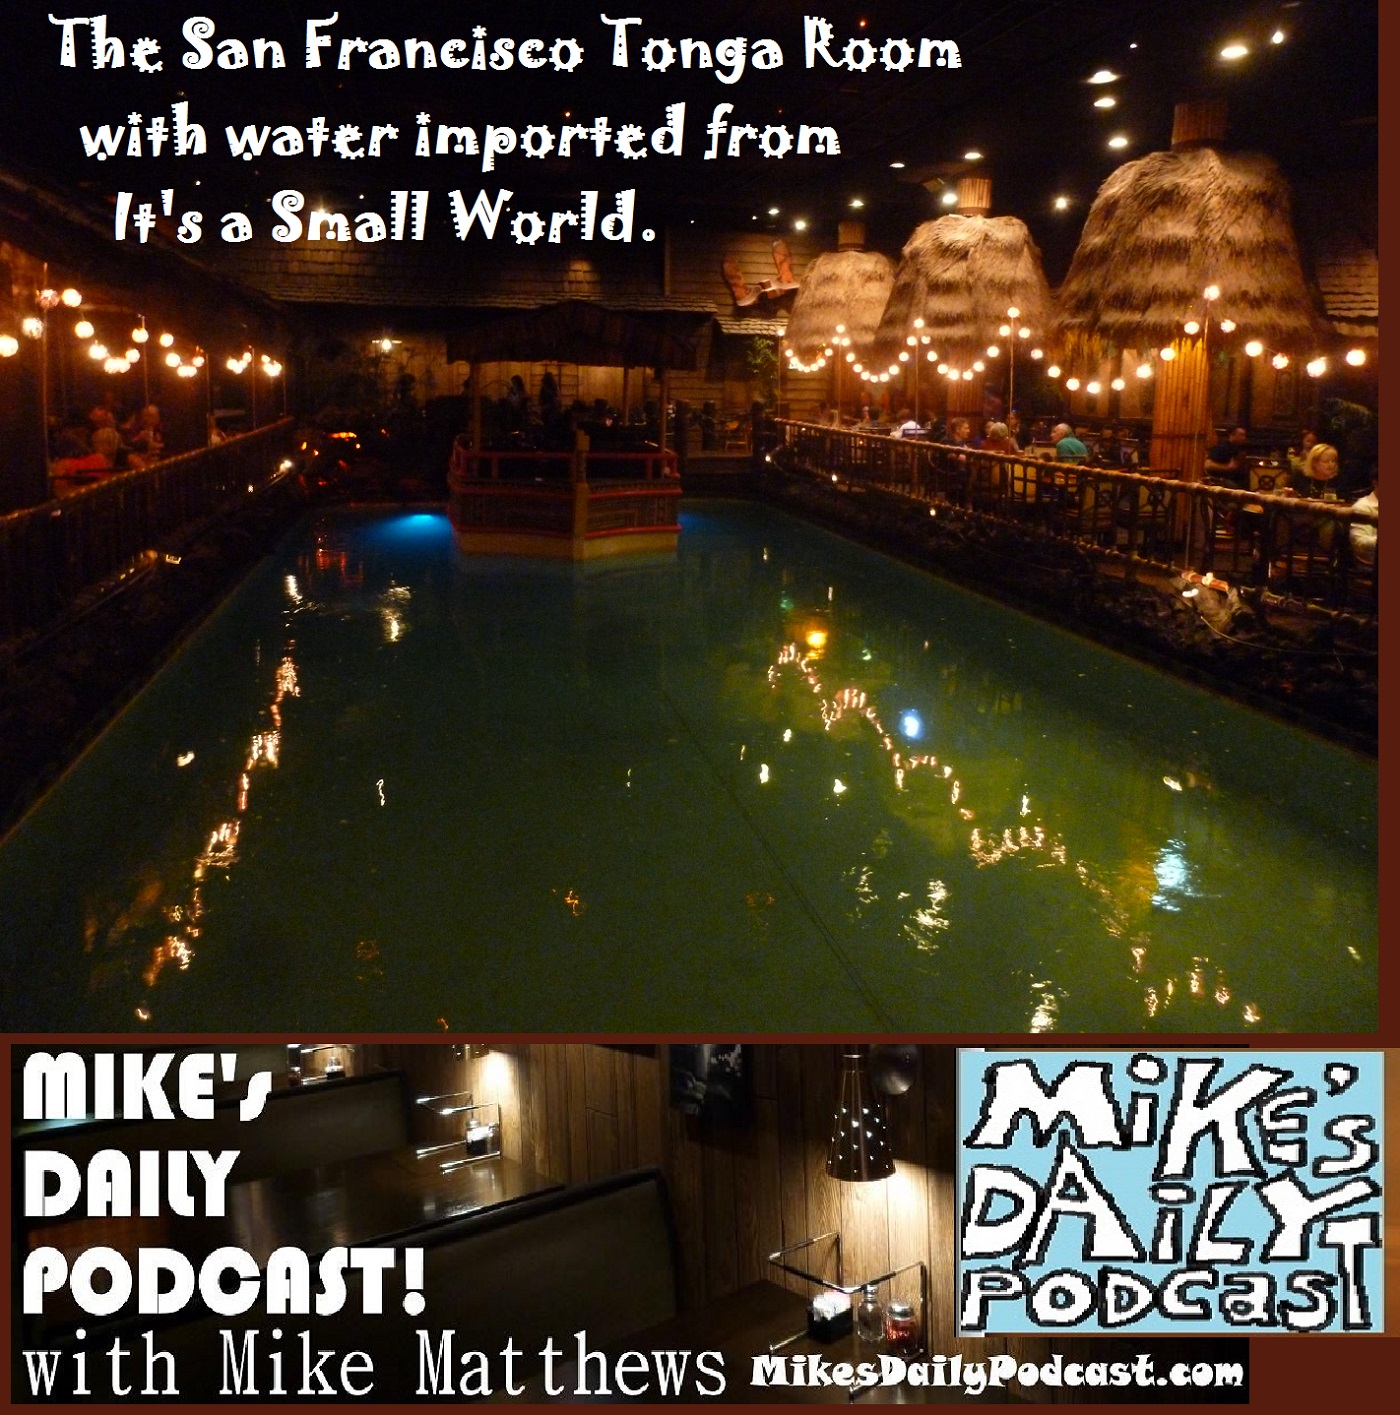 mikes-daily-podcast-1221-tonga-room